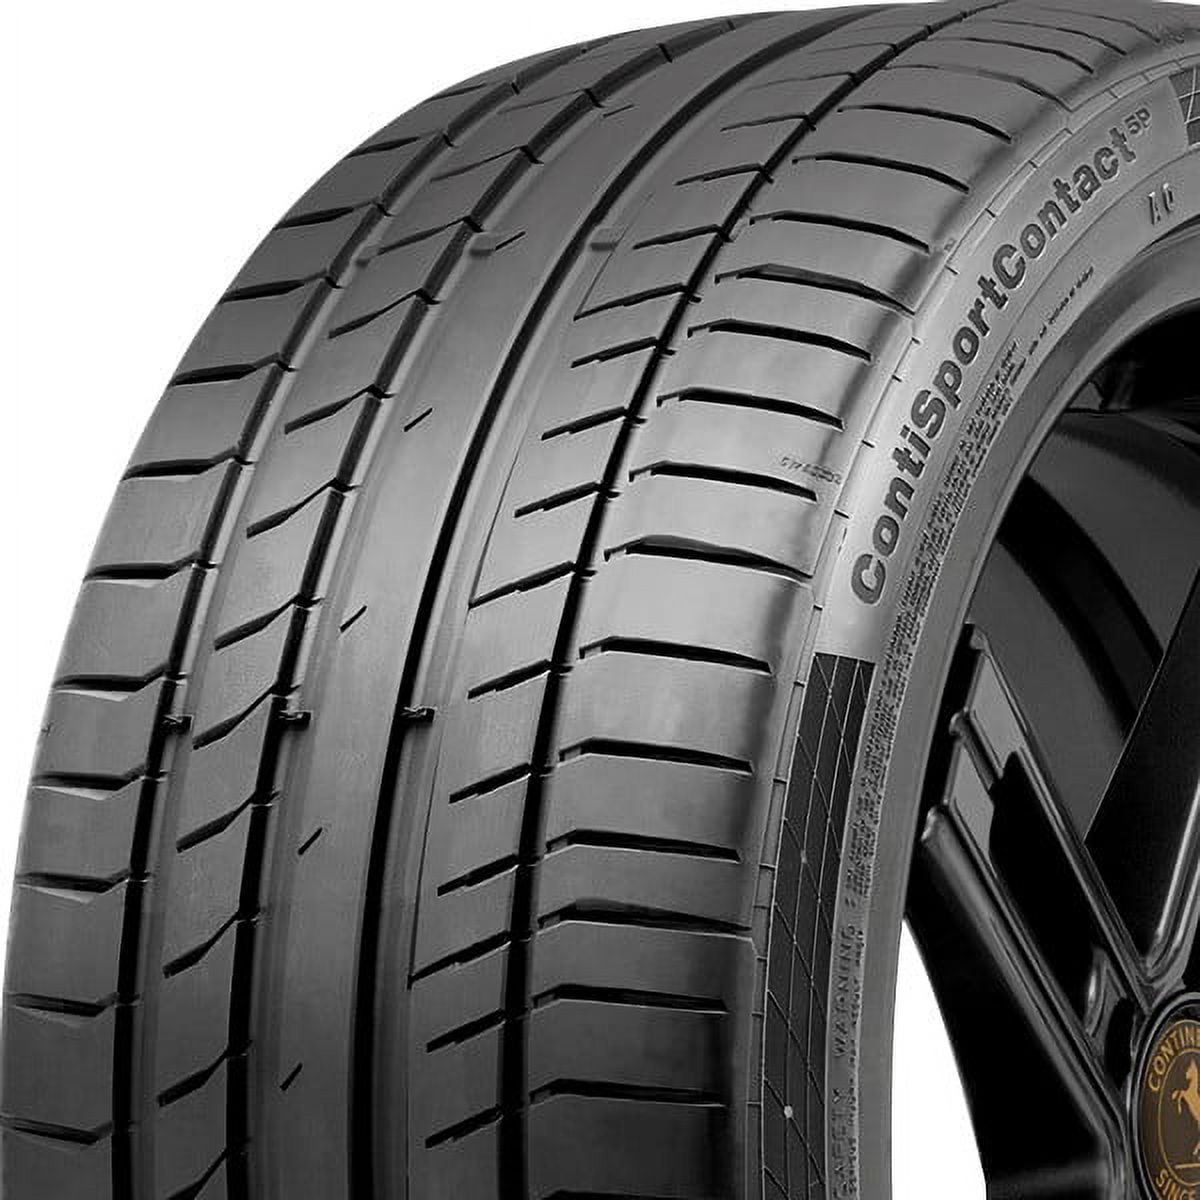 High Ultra 225/45R17 BSW ContiSportContact Continental 91Y Tire 5 Performance